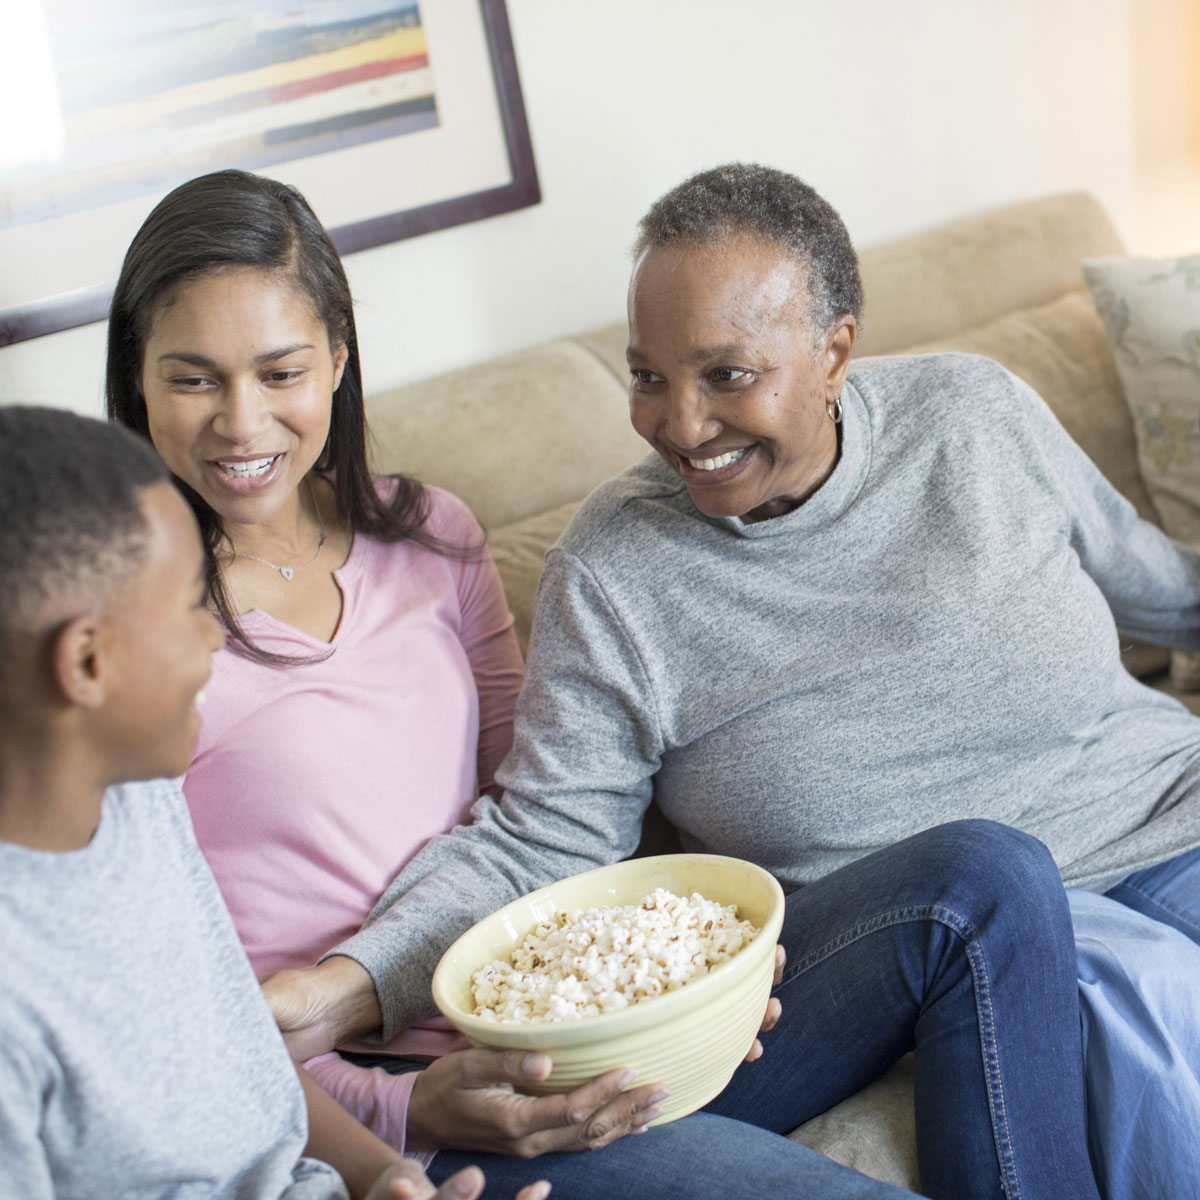 A grandmother, daughter and two grandsons laughing and enjoying time together sitting on the couch with a bowl of popcorn.